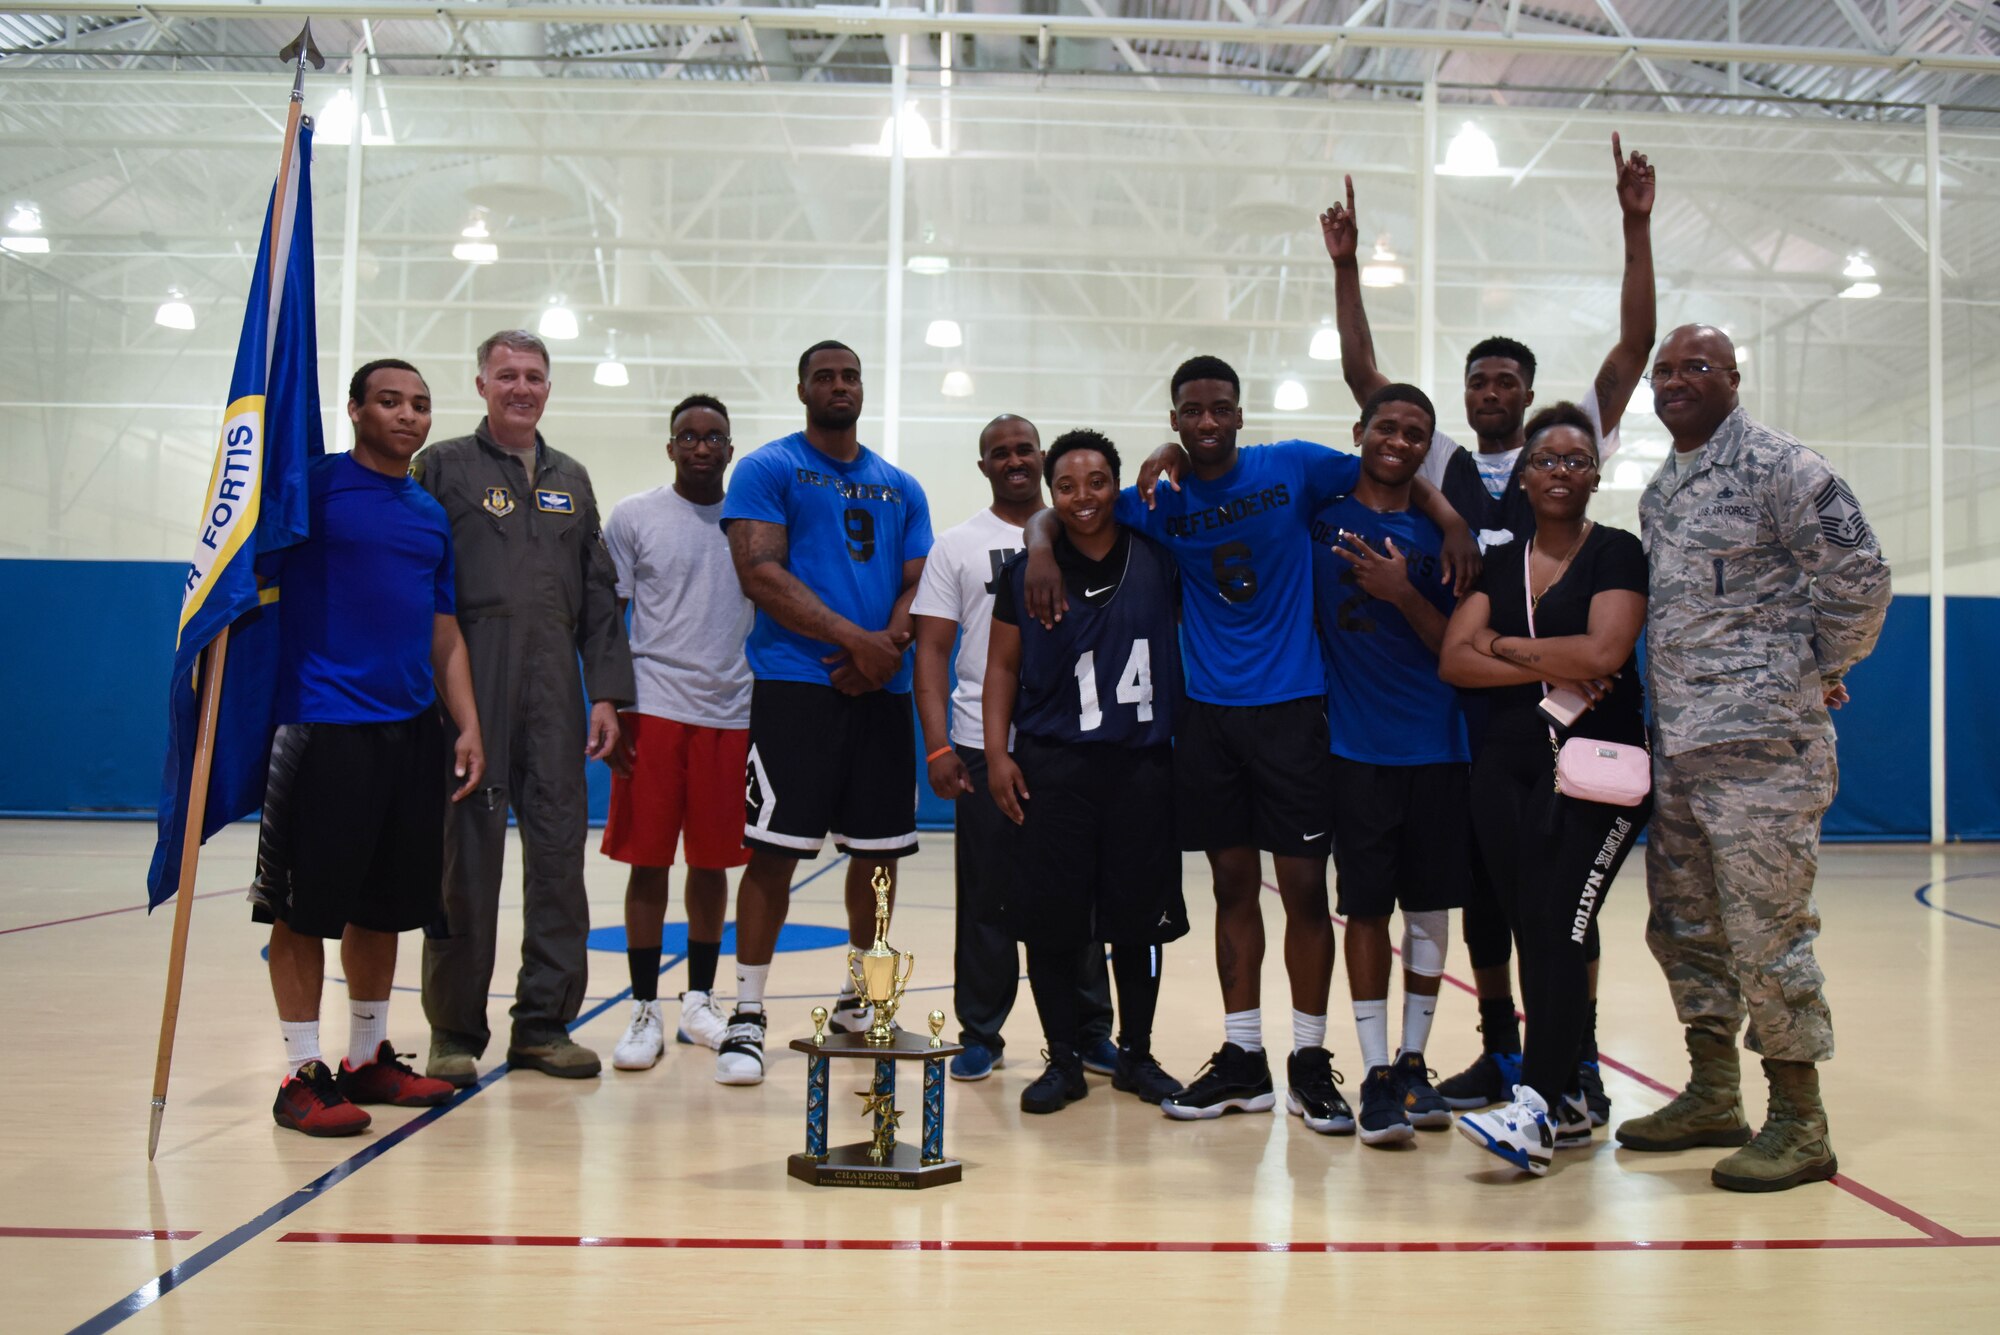 The 2nd Security Forces Squadron basketball team poses with their trophy after defeating the 2nd Force Support Squadron basketball team in two games at Barksdale Air Force Base, La., April 18, 2016. The Defenders won game two 46-39 to clinch the title. (Air Force photo/Airman 1st Class Stuart Bright)